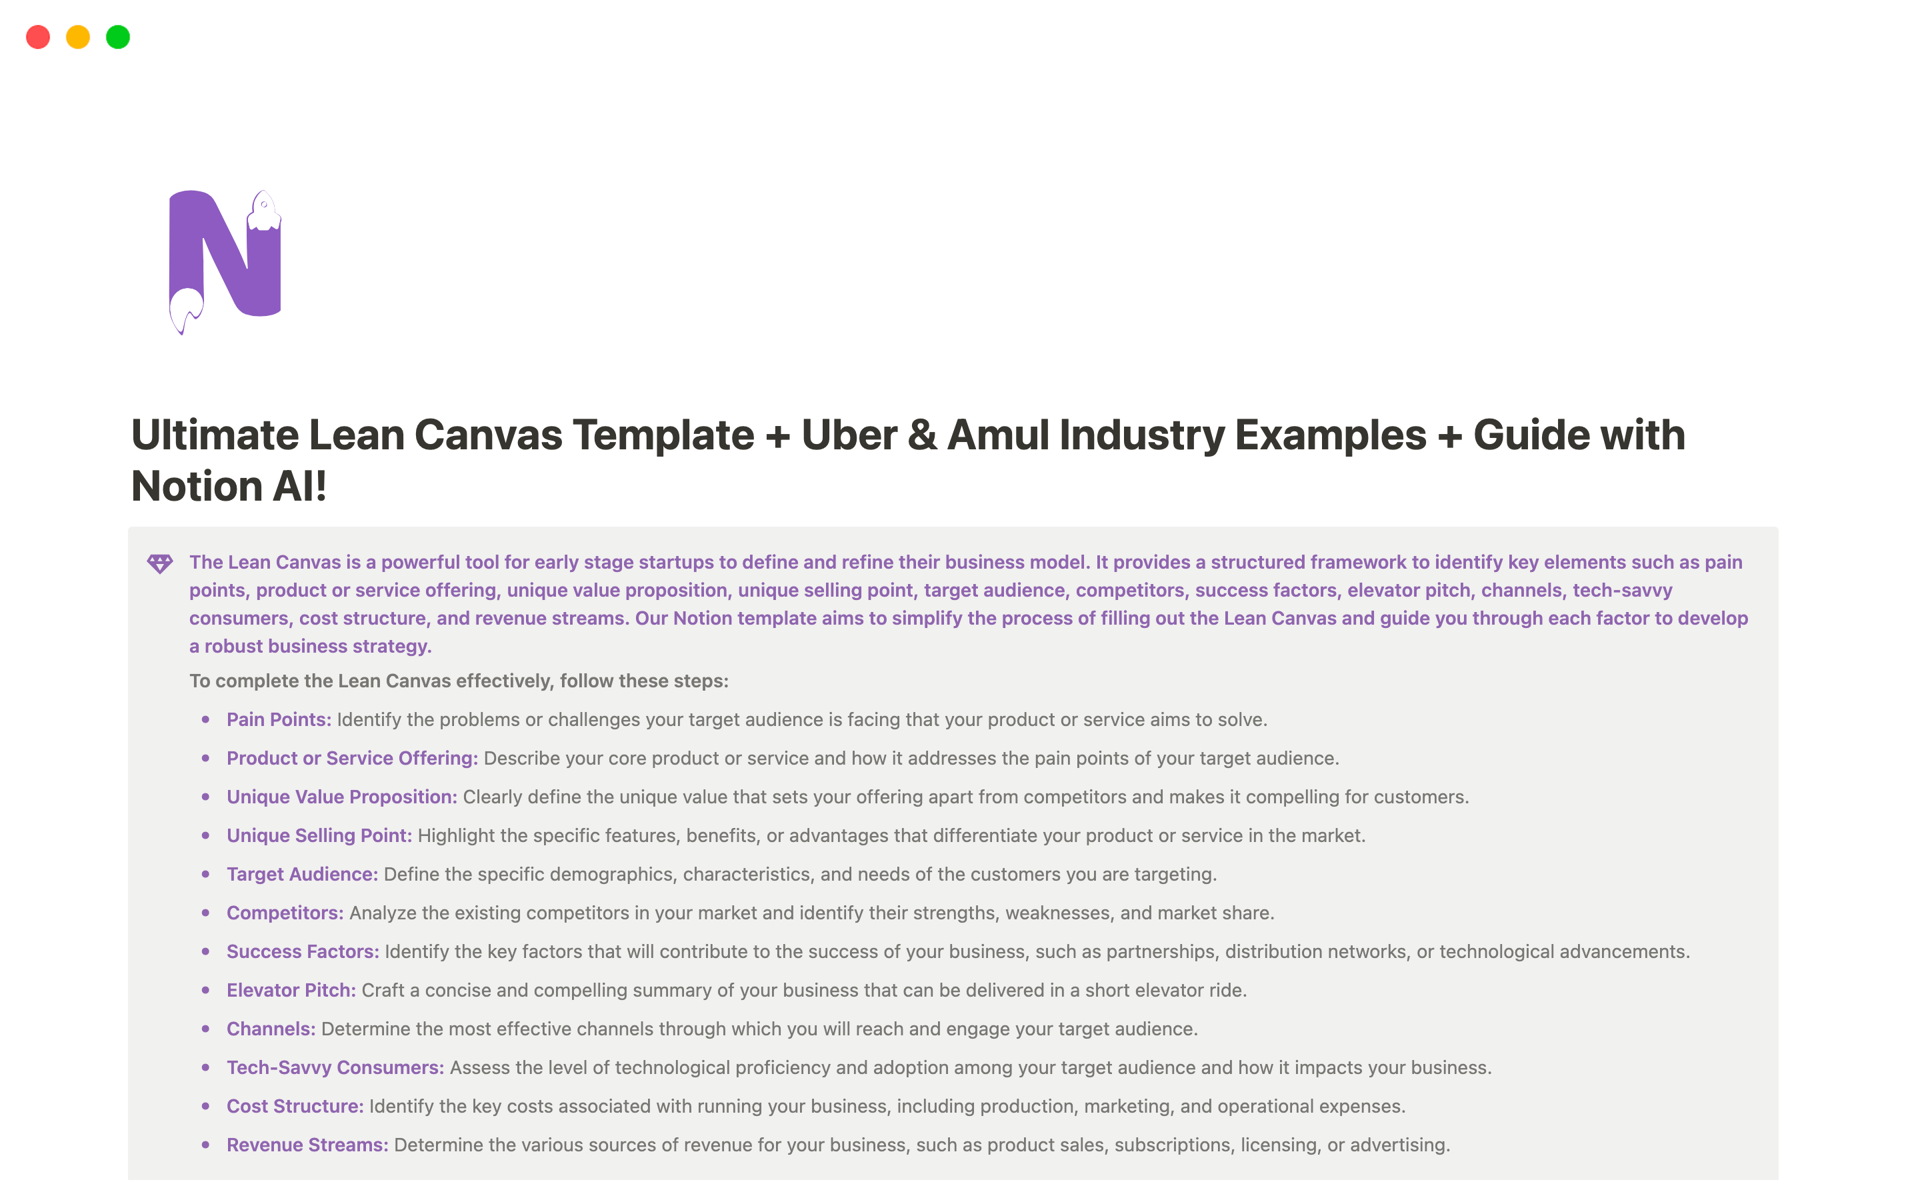 Unleash business success with the Ultimate Lean Canvas Notion Template, featuring AI and real-world examples from Uber and Amul.